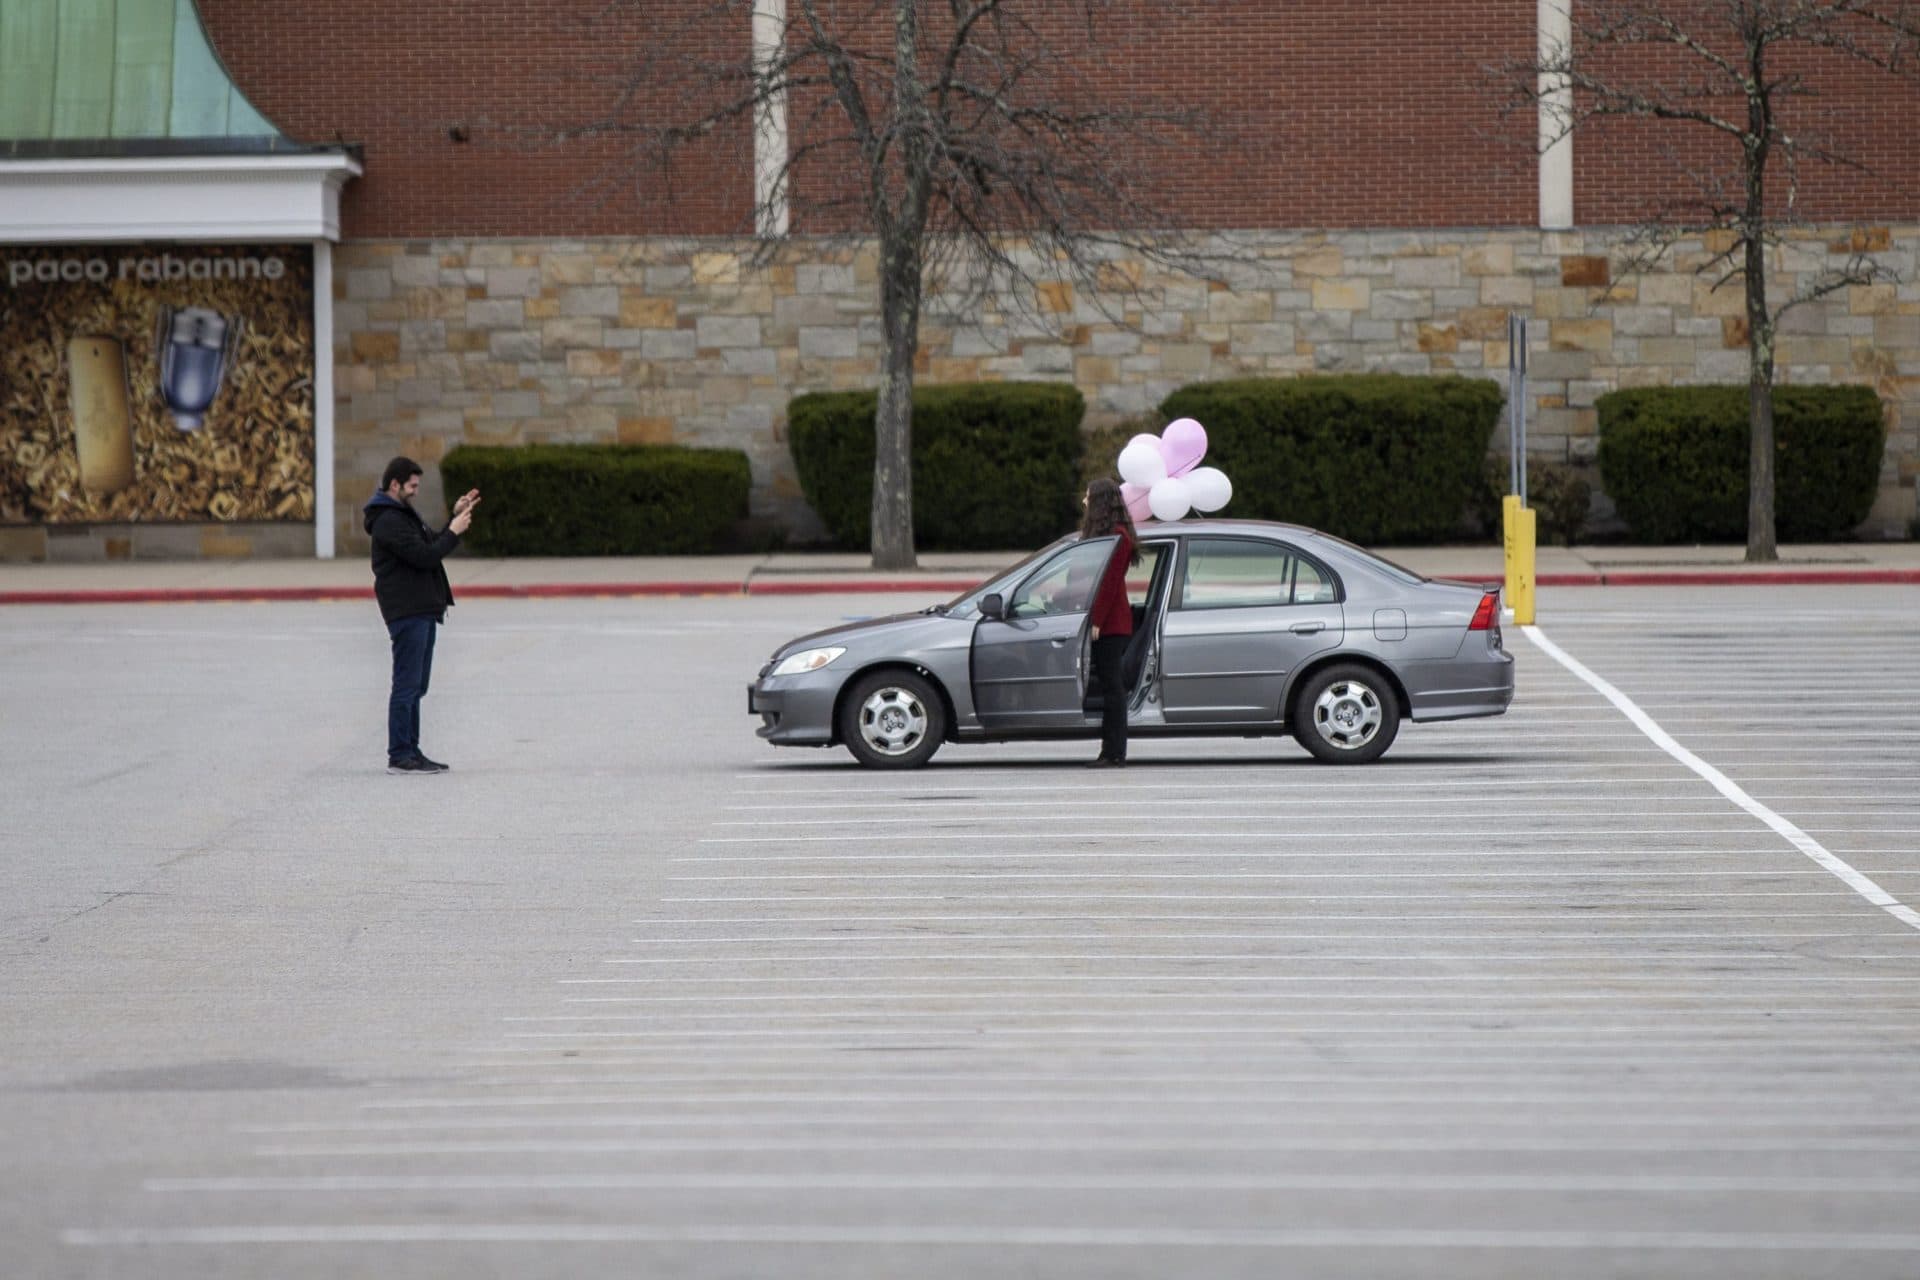 Aykut Turkoglu and his wife Sevil celebrate owning her first car by taking a photo in the empty Burlington Mall parking lot. (Jesse Costa/WBUR)